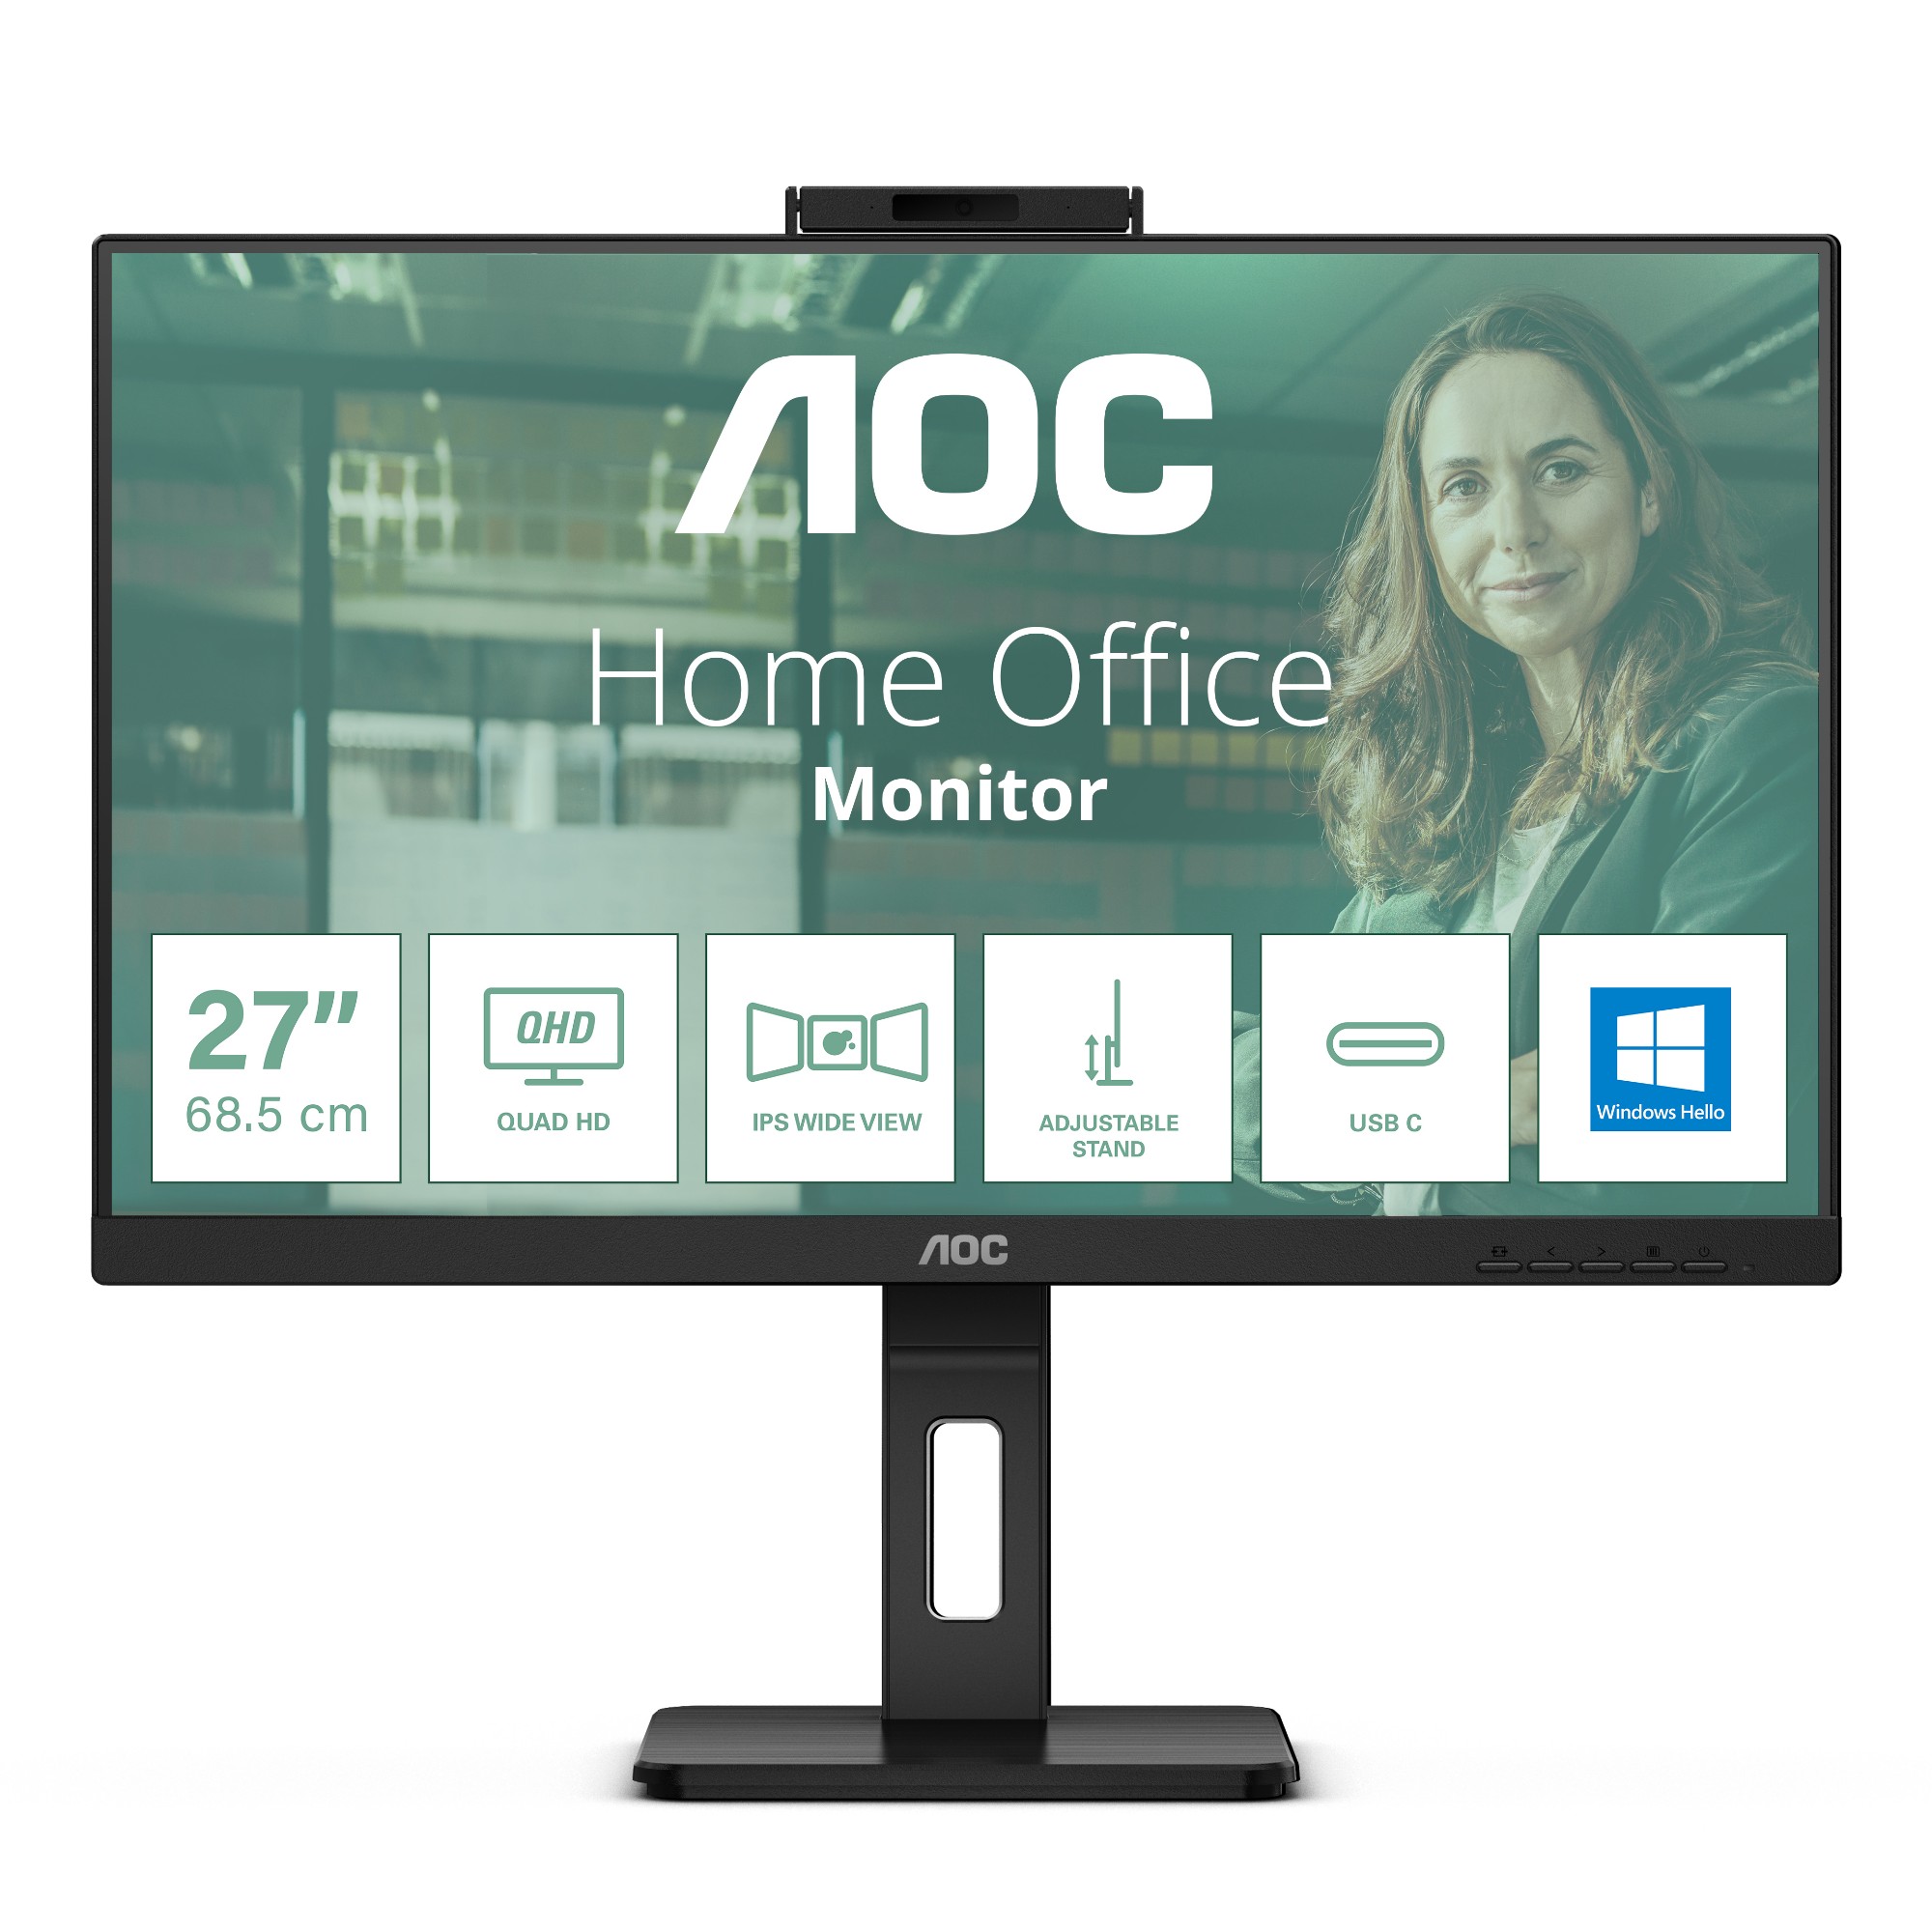 Screen size (inch) 27, Panel resolution 2560x1440, Refresh rate 75 Hz, Panel type IPS, HDMI HDMI 1.4 x 2, Display Port DisplayPort 1.2 x 1, Sync technology (VRR) Adaptive Sync